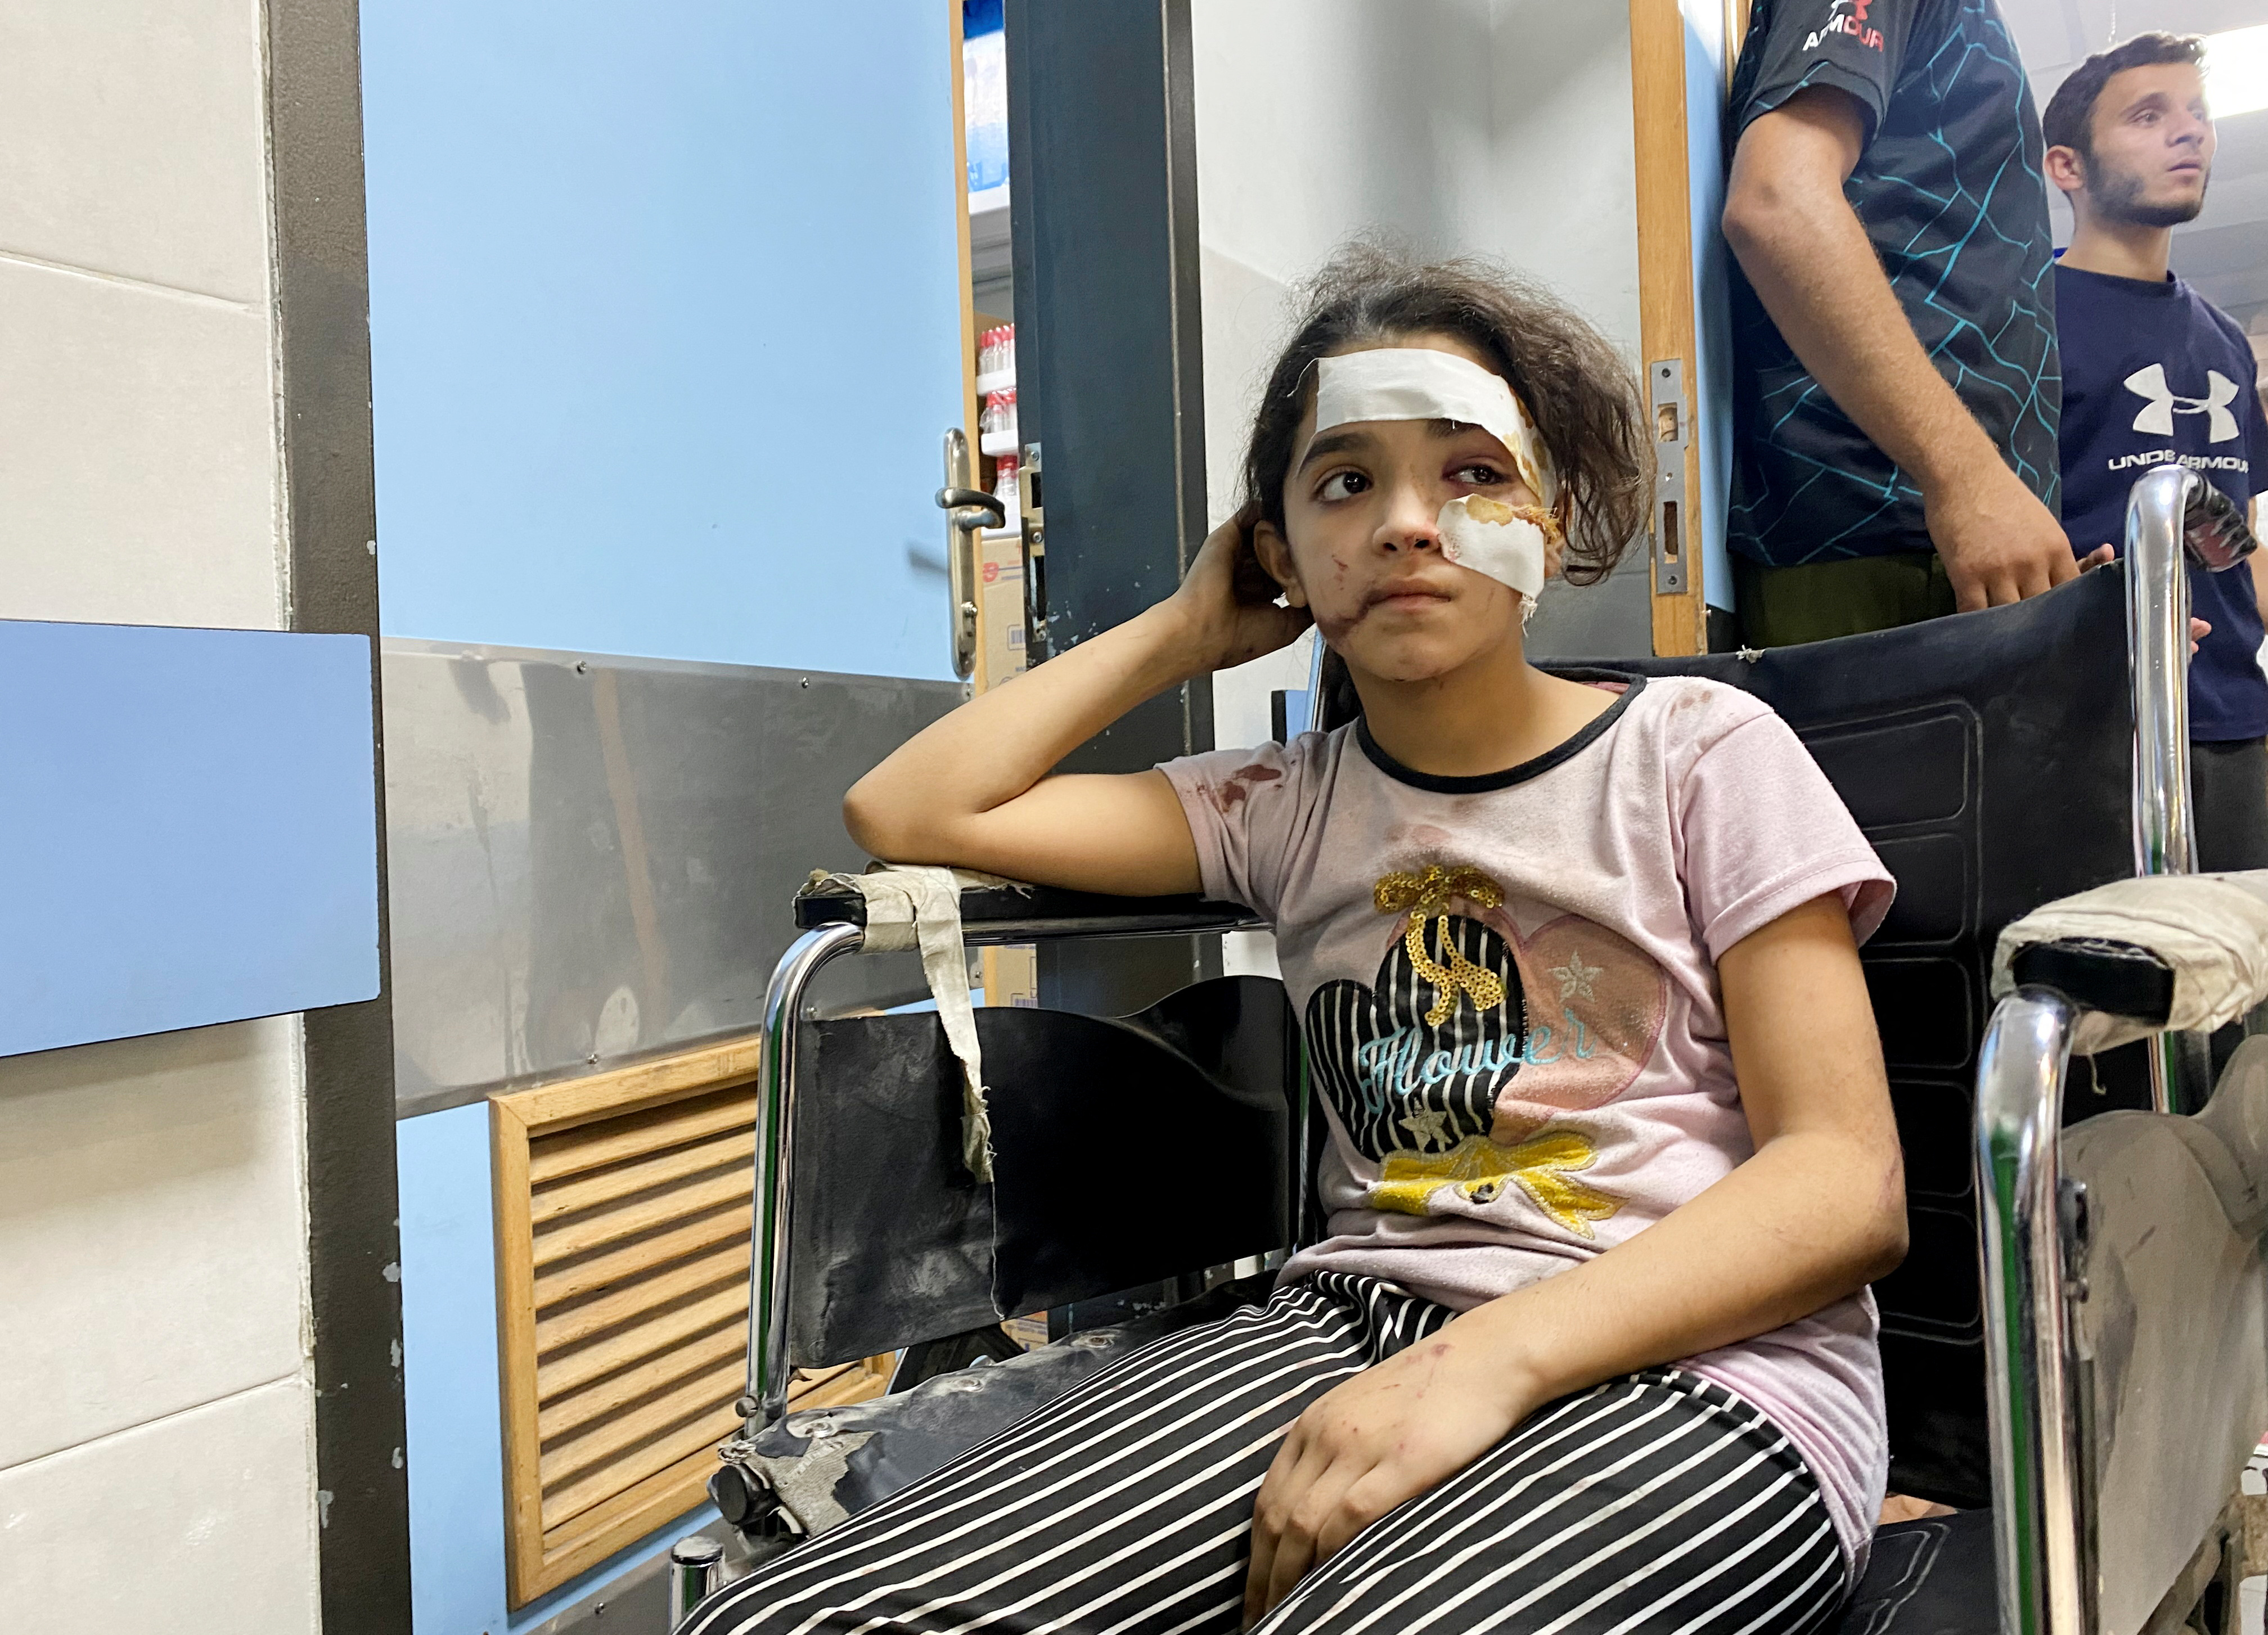 A wounded Palestinian girl waits at Al Shifa hospital, in Gaza City. But as she seeks safety and treatment, there are concerns the hospital could be struck by Israeli strikes. /Doaa Rouqa/Reuters
